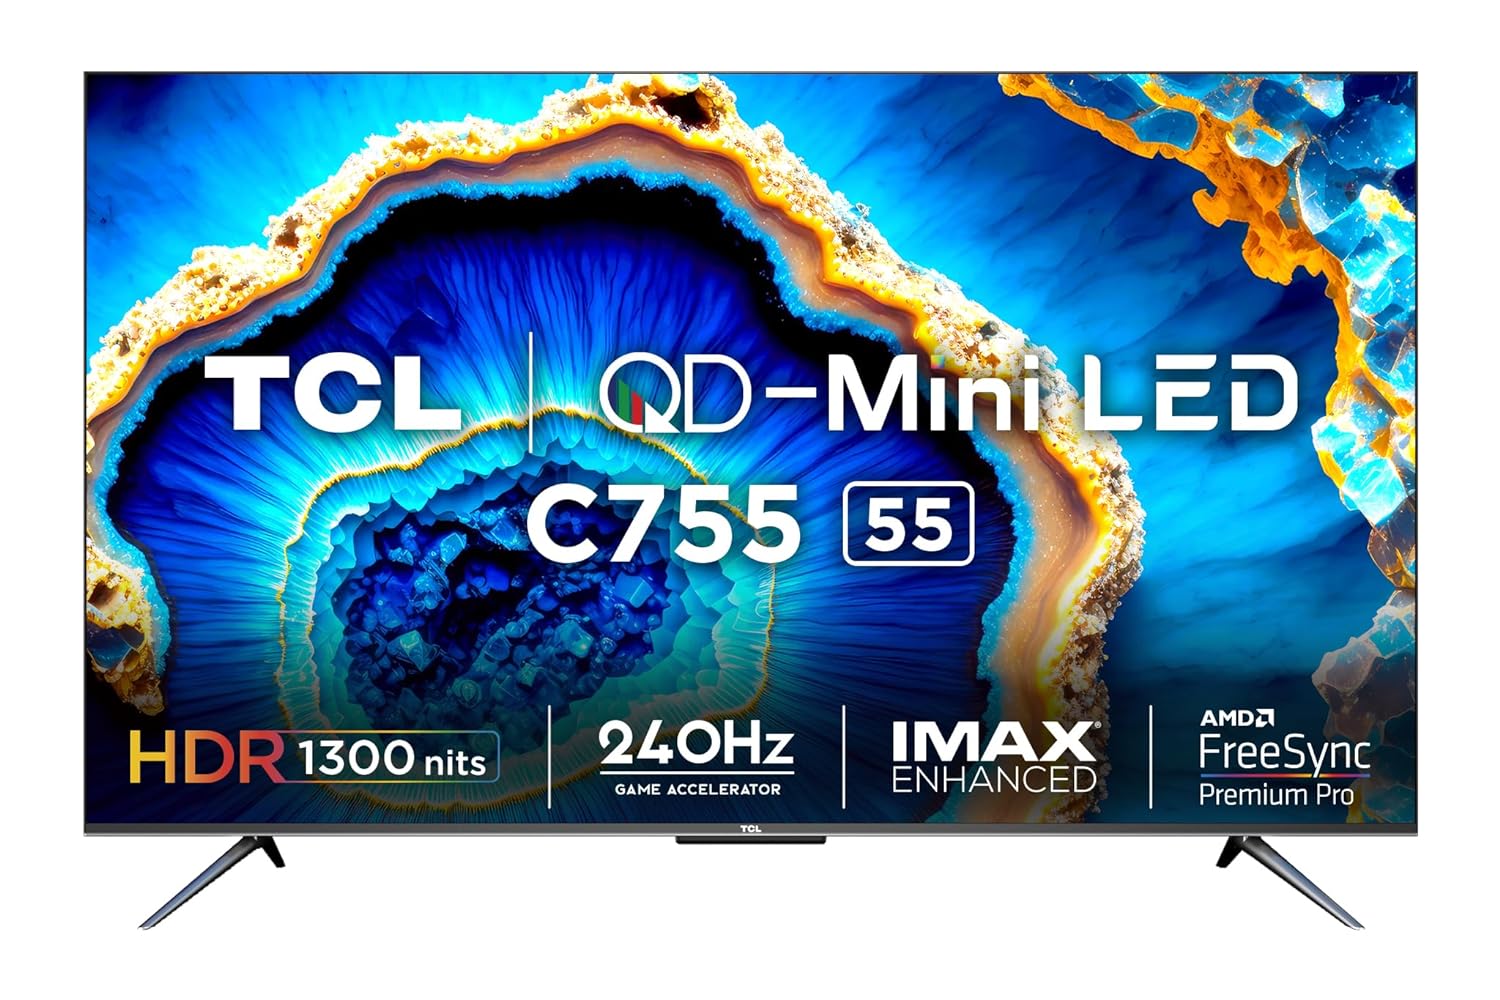 TCL C755 55-inch